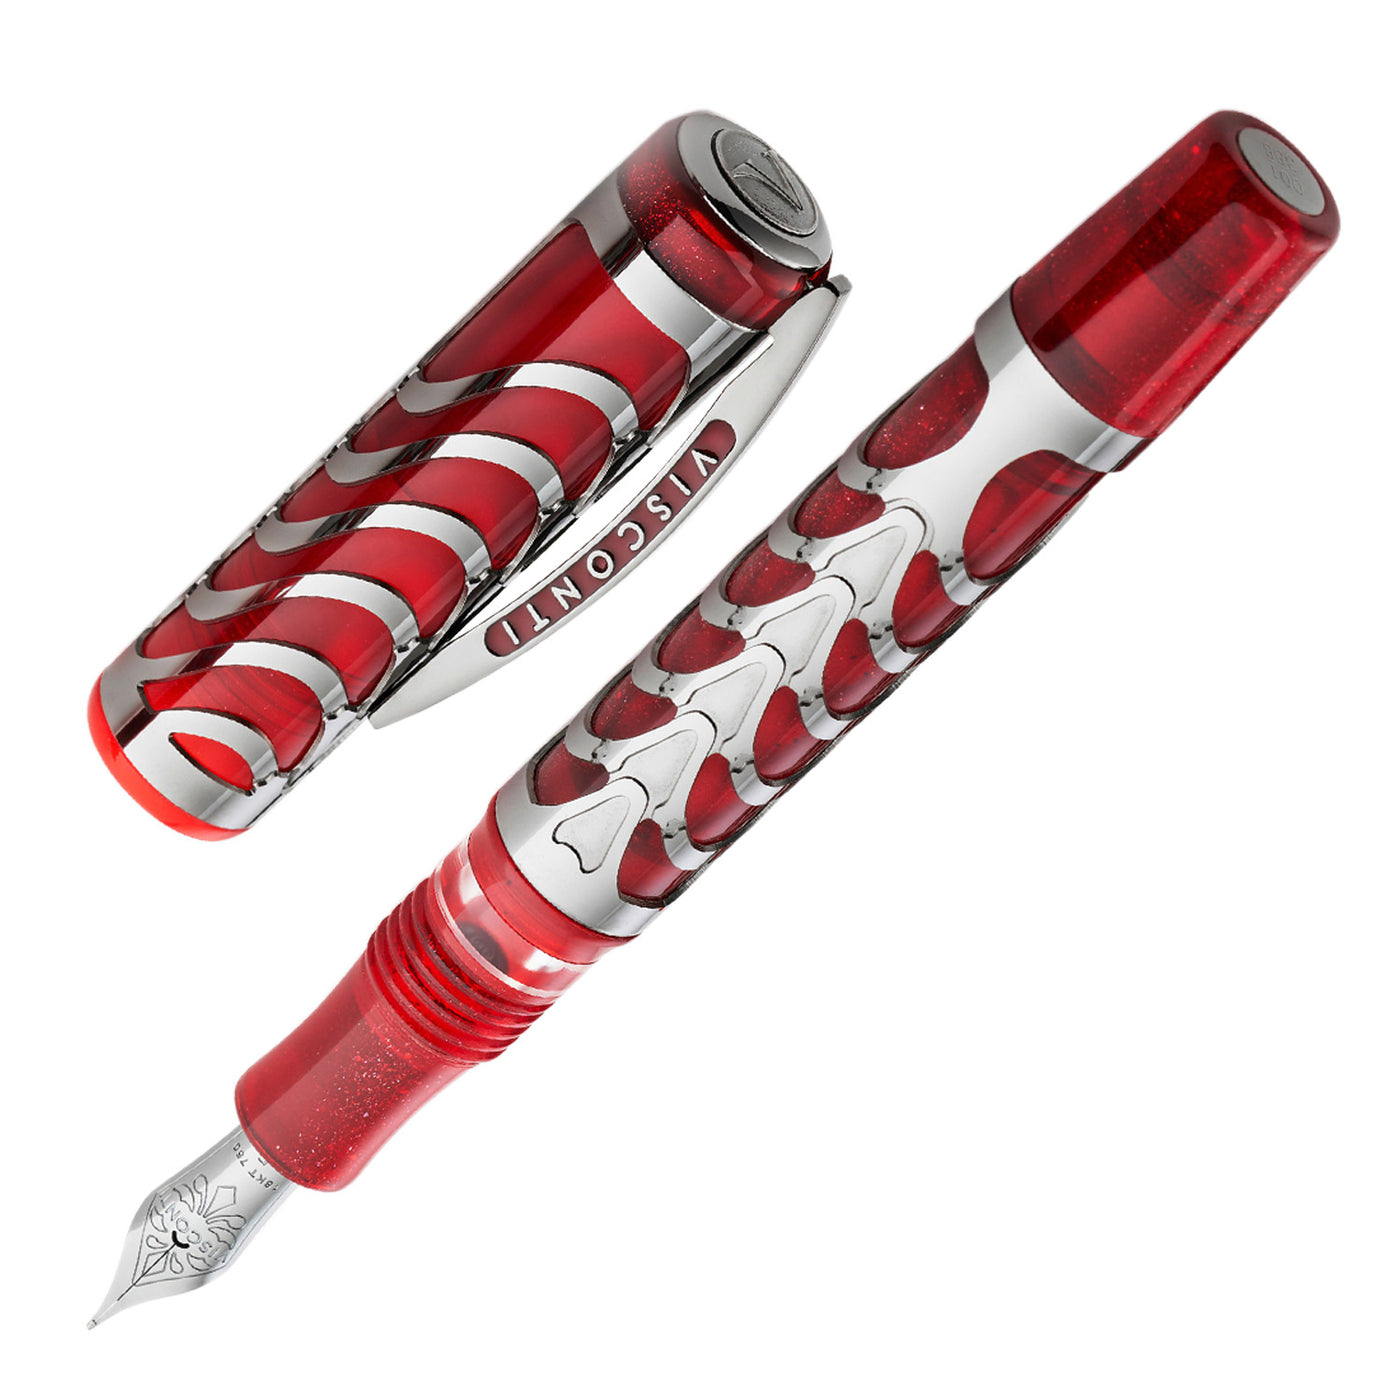 Visconti Skeleton Fountain Pen - Red (Limited Edition) 1